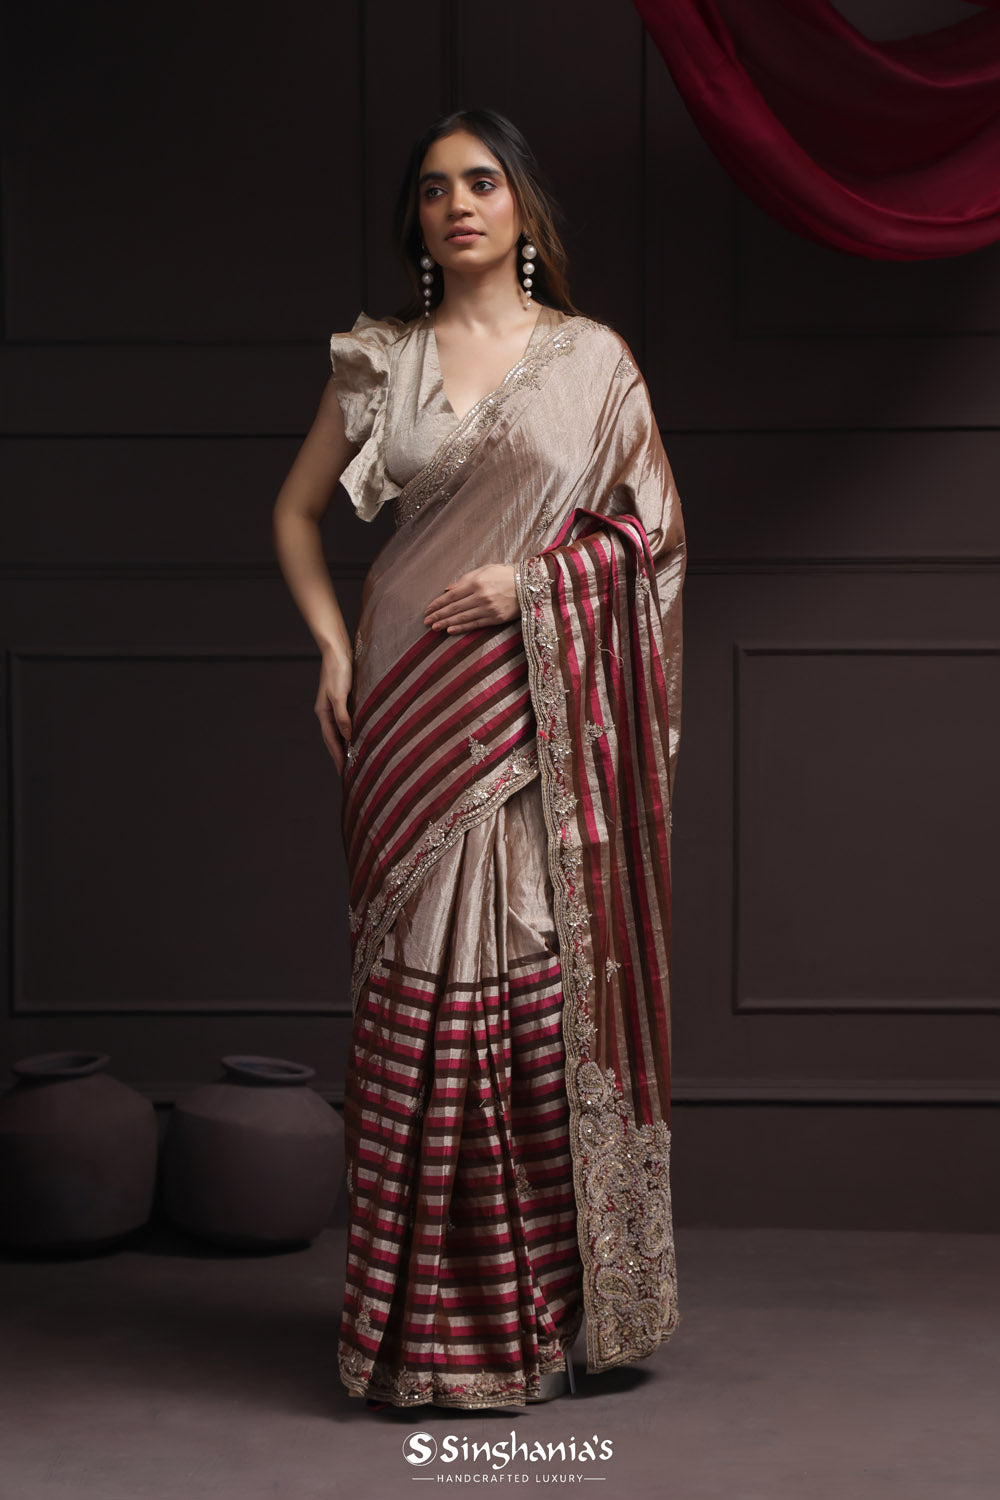 Grey Multi Color Tissue Designer Saree With Floral Embroidery Border